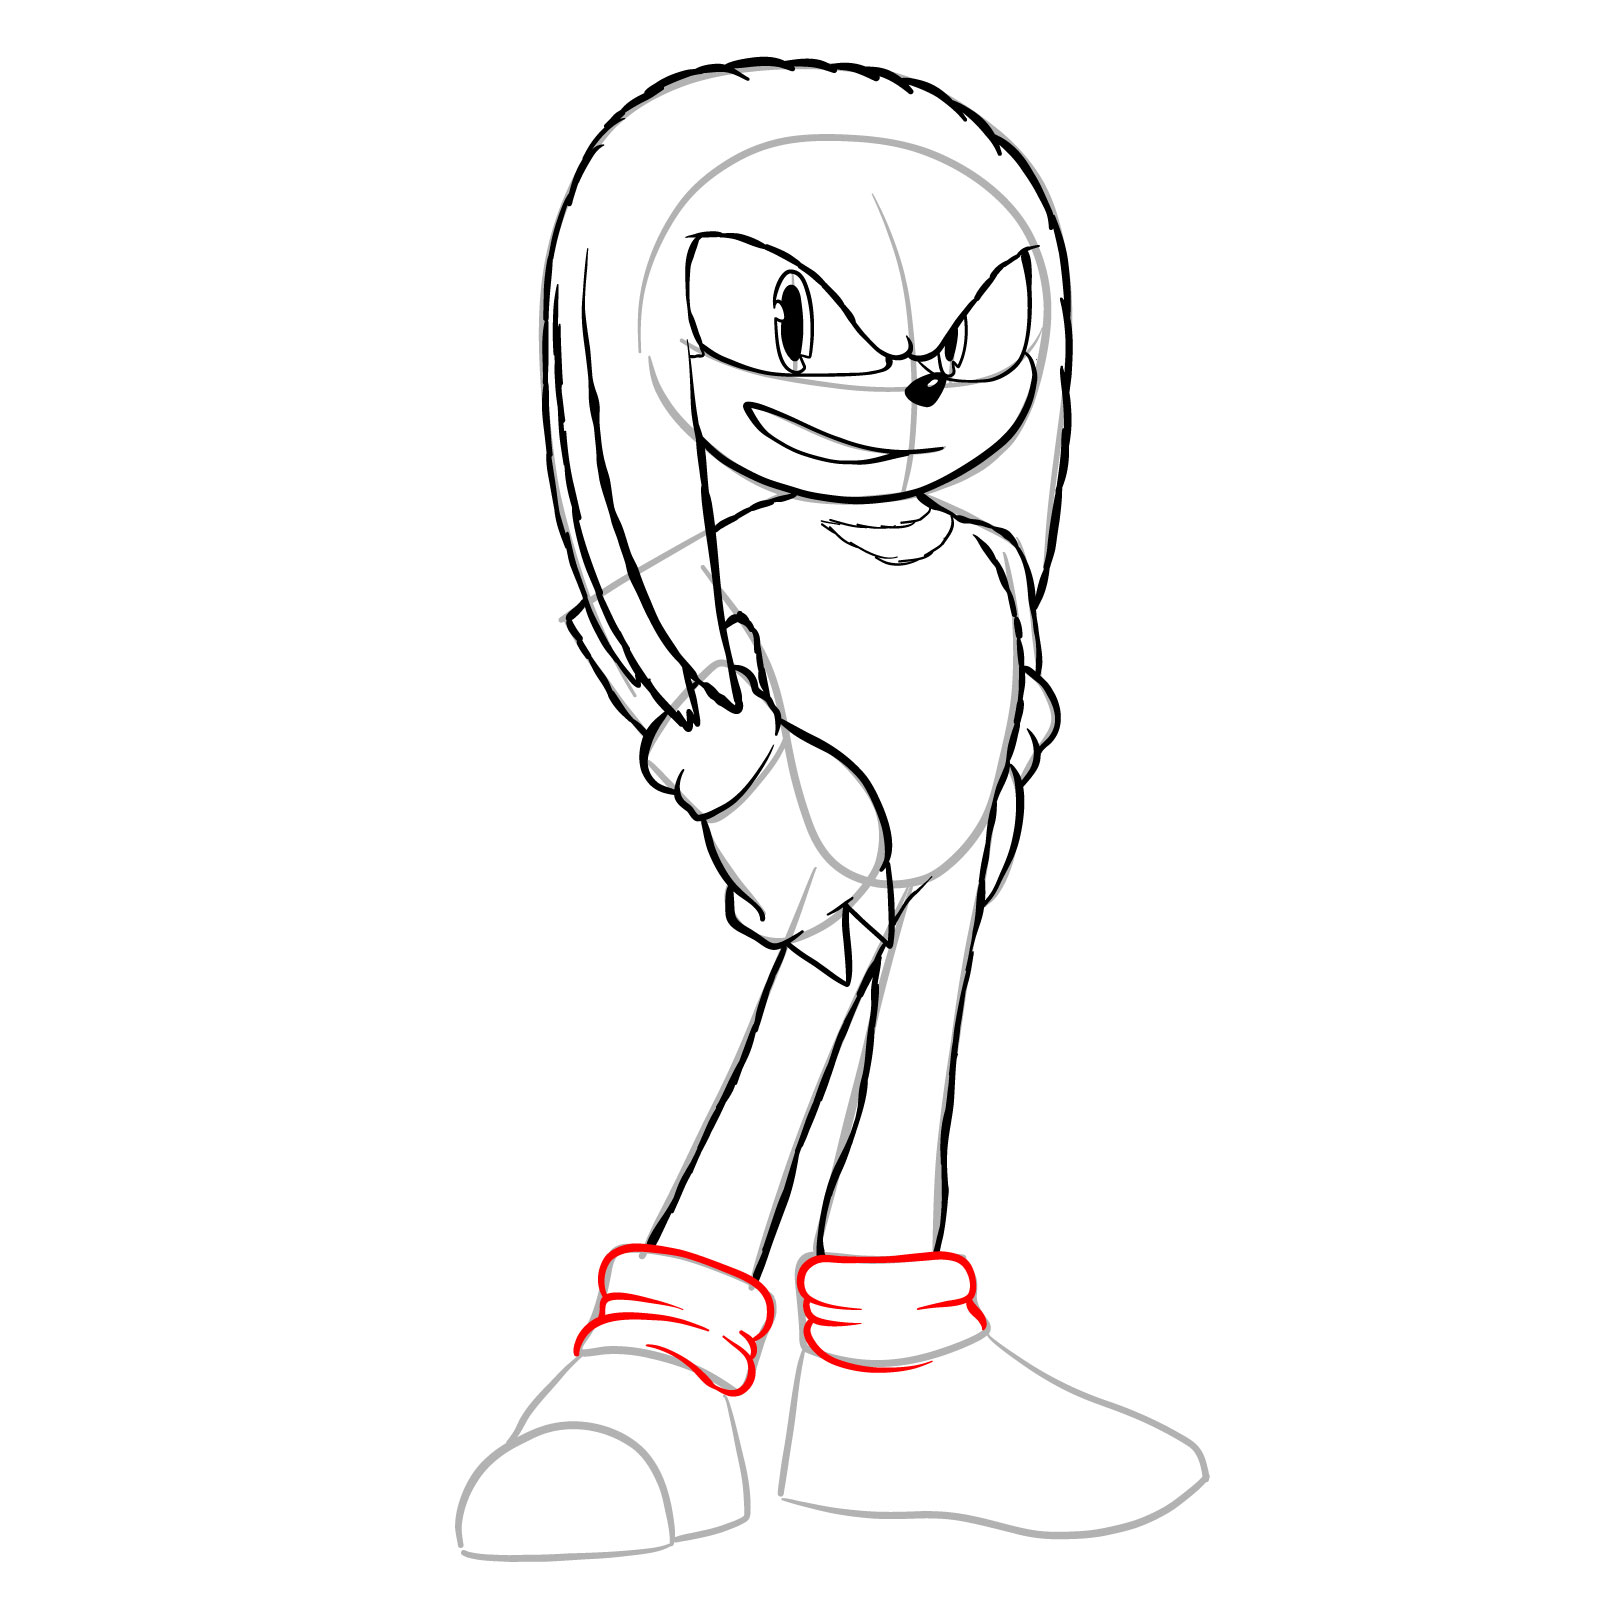 How to draw Knuckles from the movie - step 19